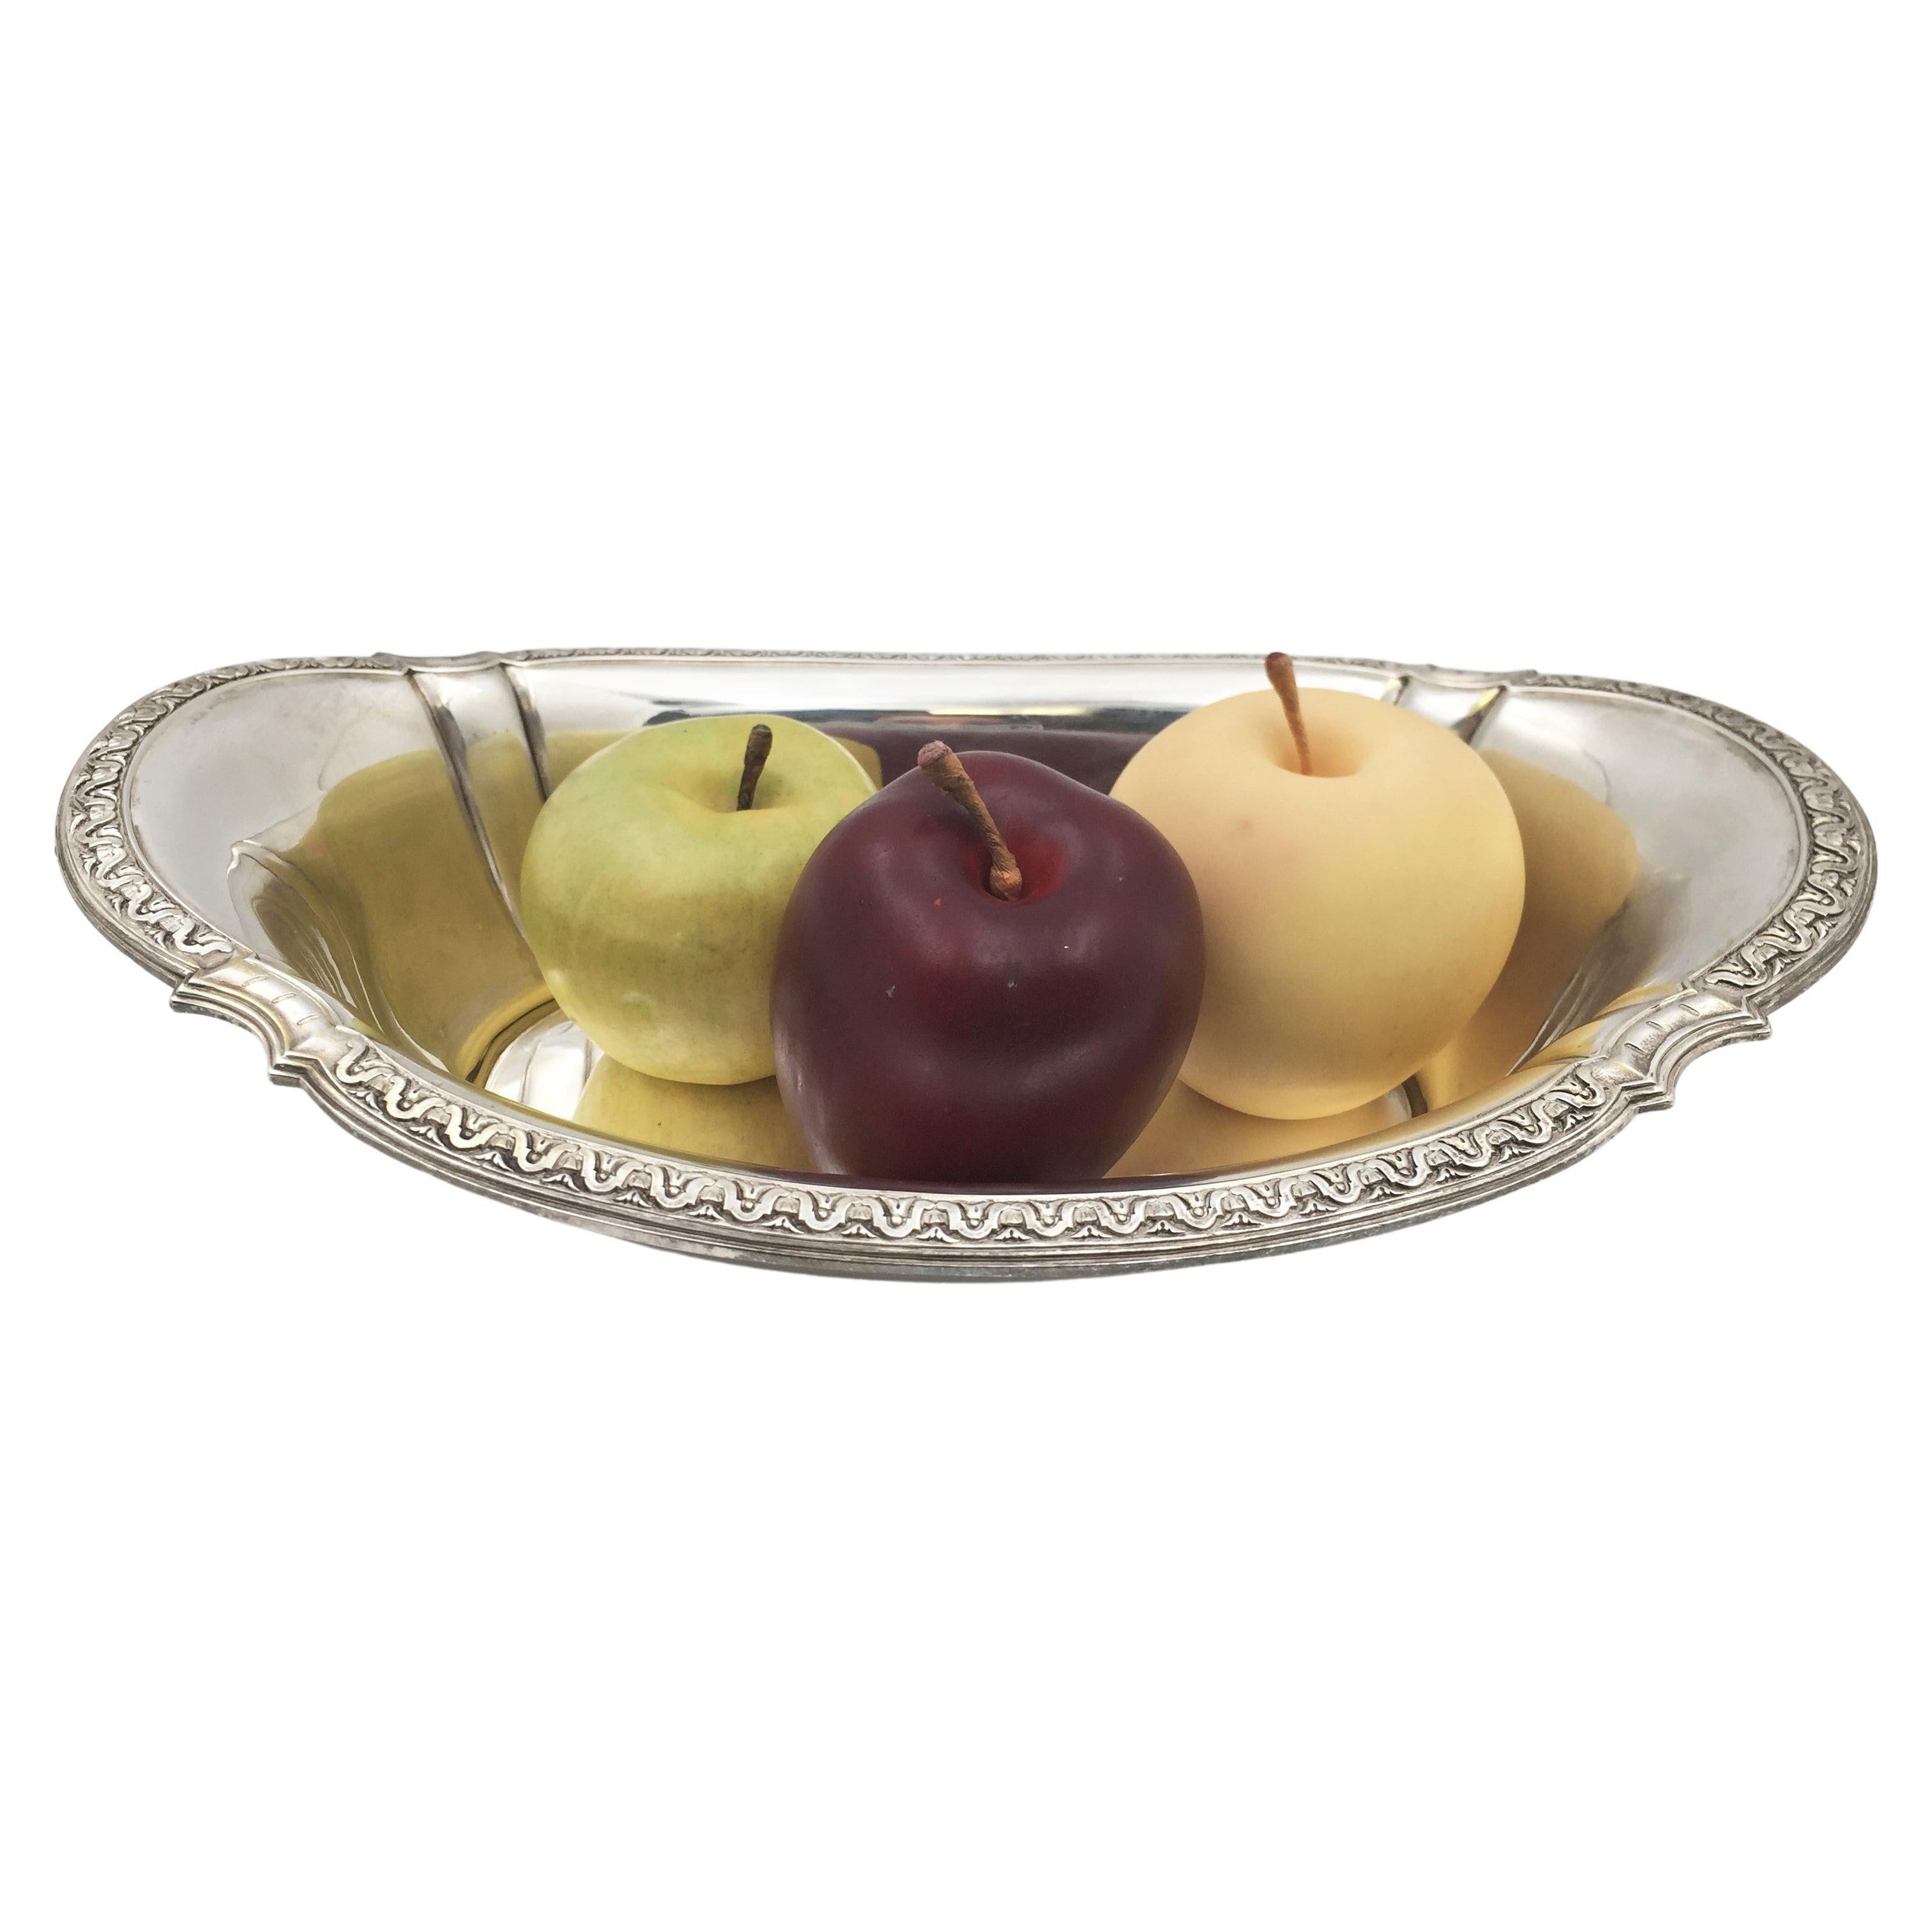 Keller French Silver 20th Century Centerpiece Bowl For Sale